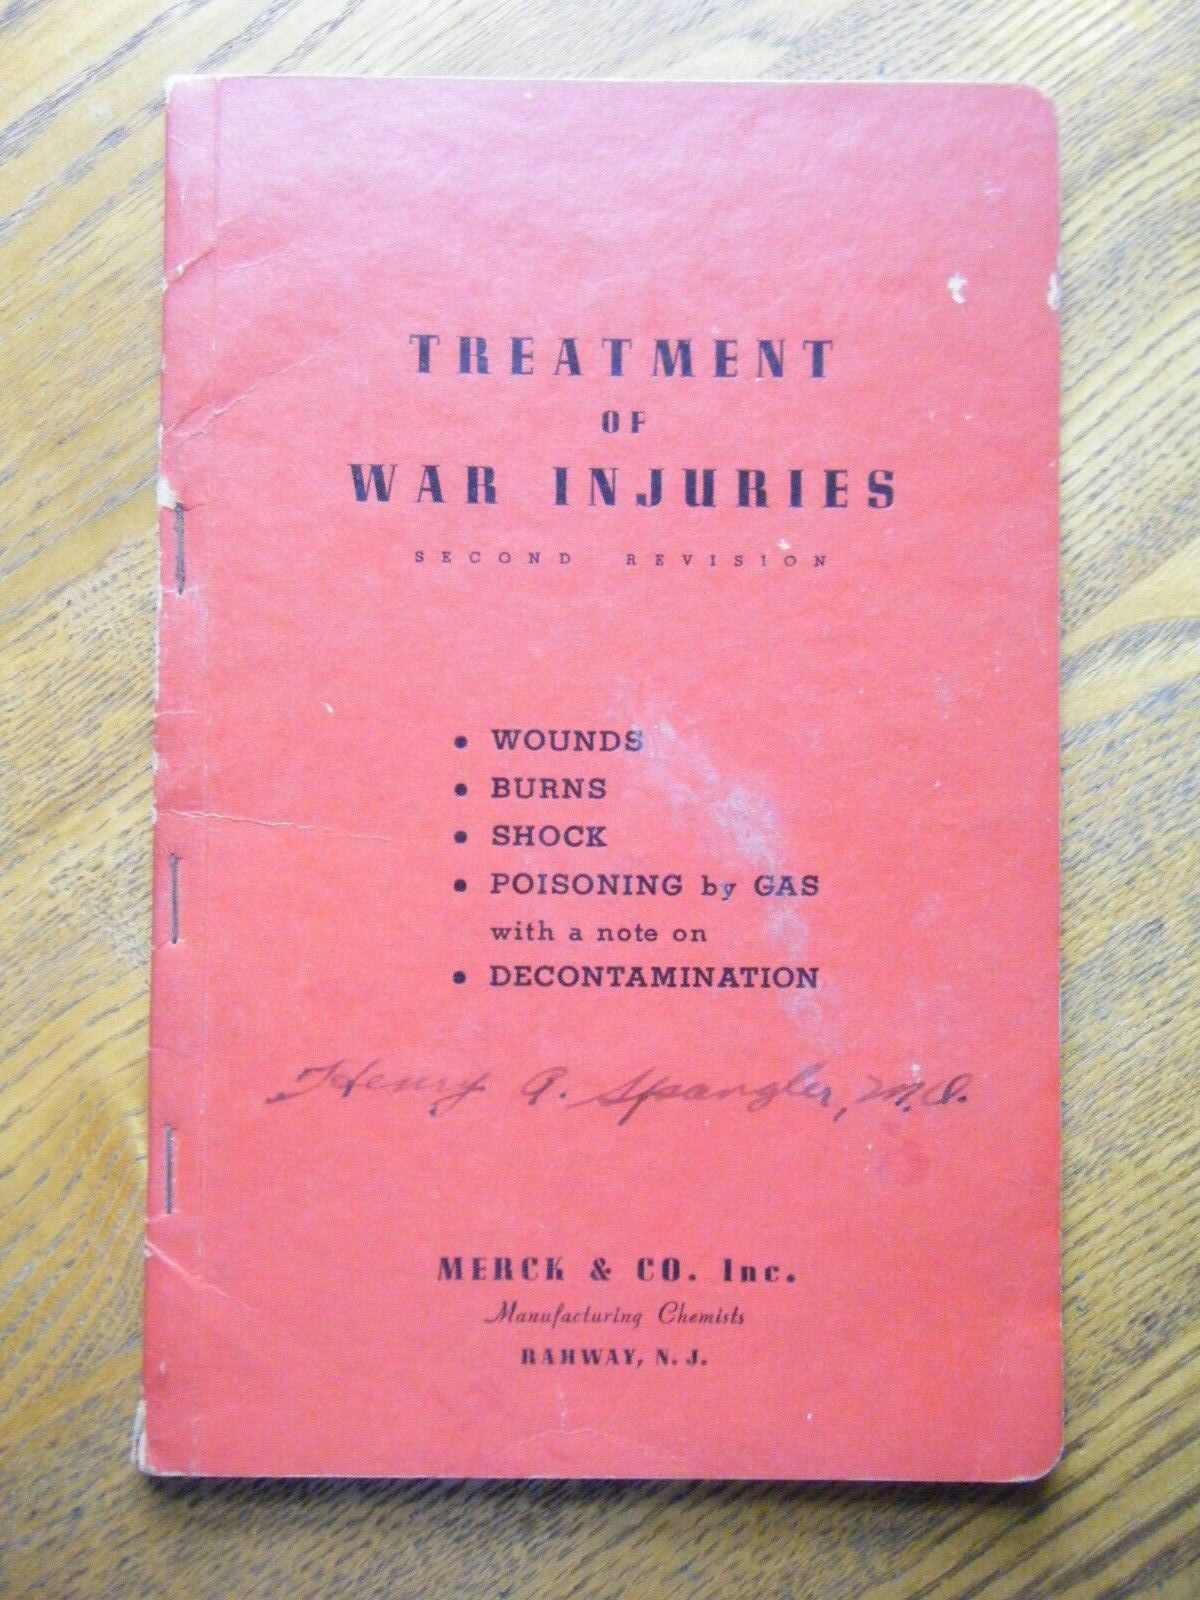 Treatment of War Injuries - Wounds, Burns, Shock, Poisoning by Gas 1942 Booklet 